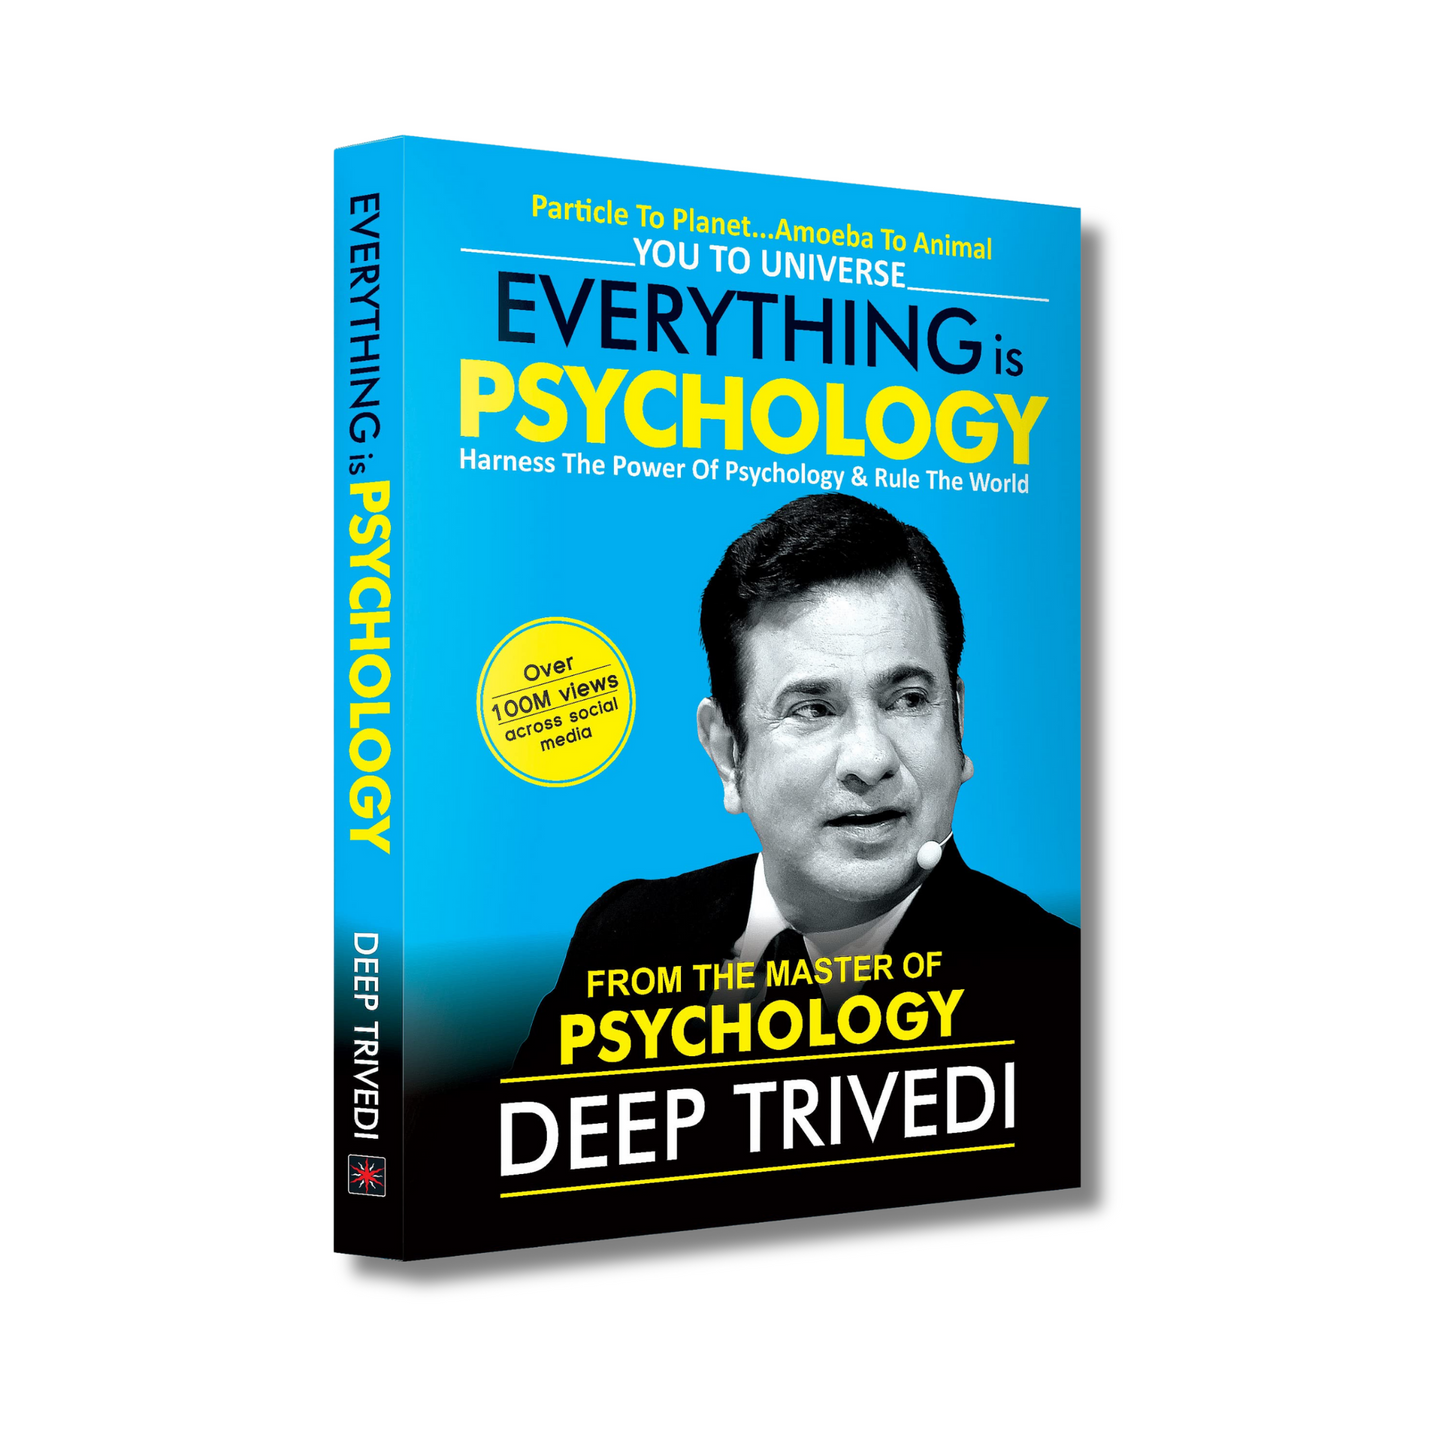 Everything is Psychology by Deep Trivedi (Paperback)